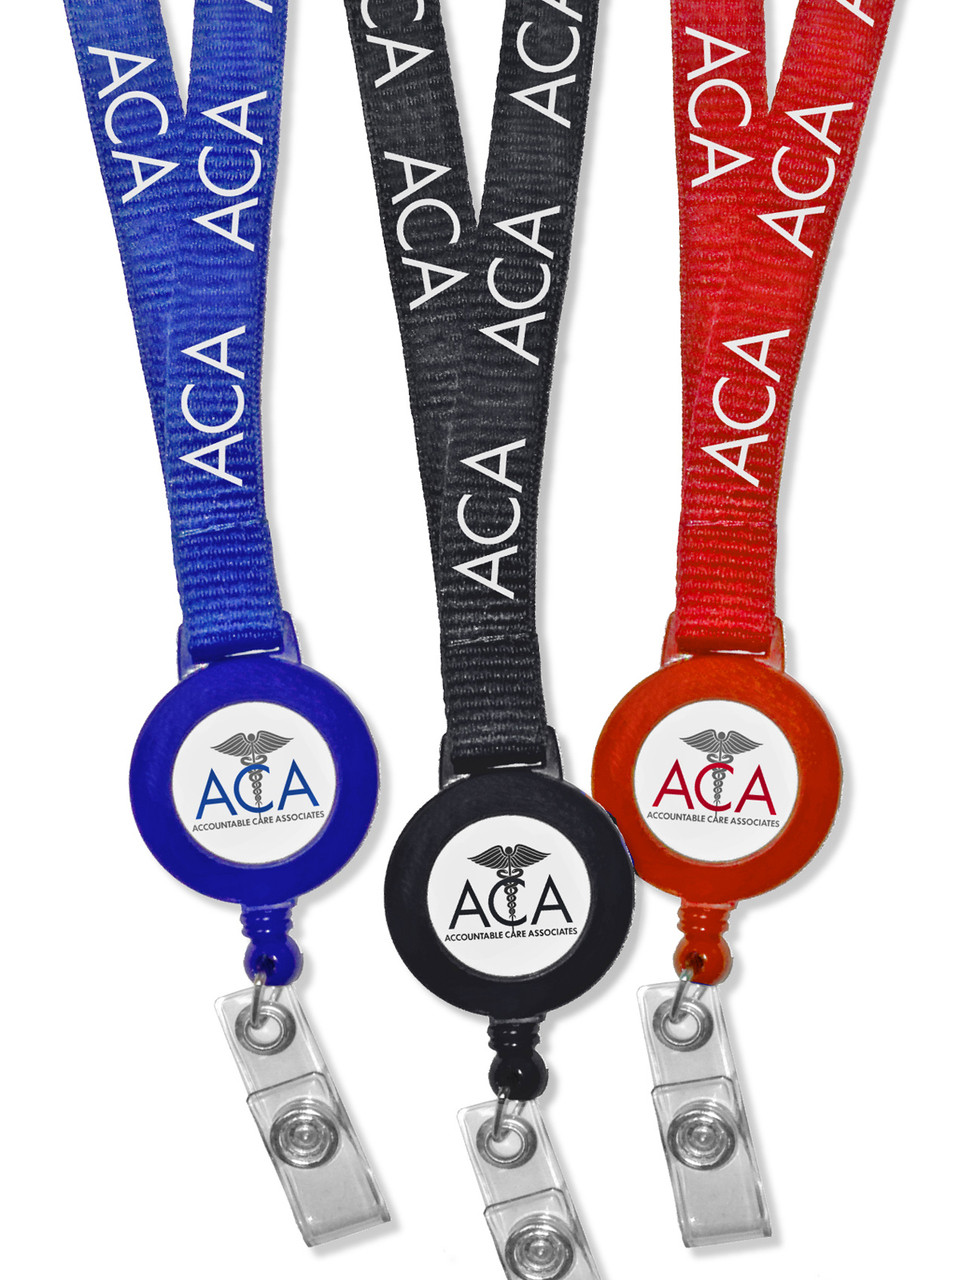 Imprinted Dye Sublimated Lanyards with Badge Reel